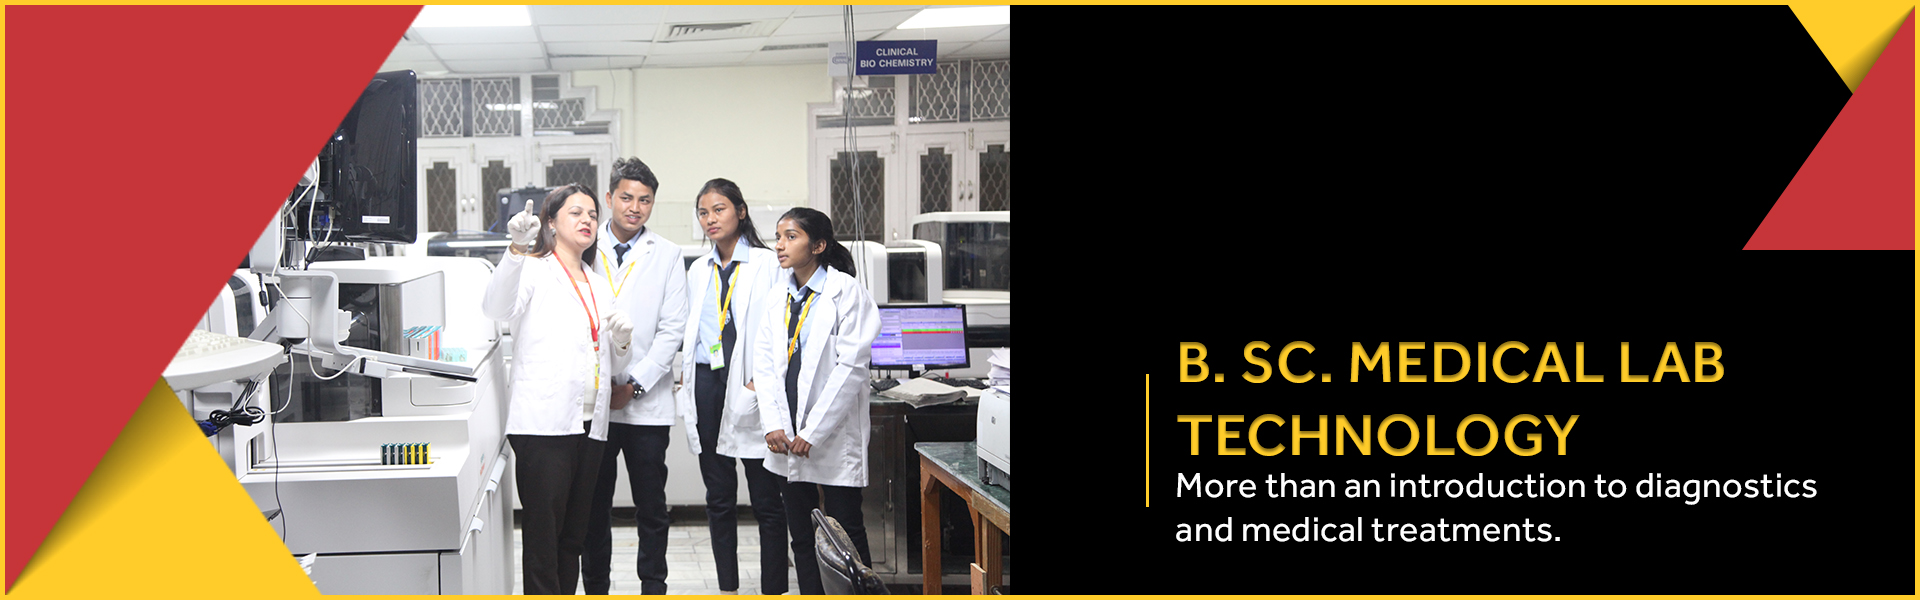 B.Sc. Medical Lab Technology Course/College in Haryana, India